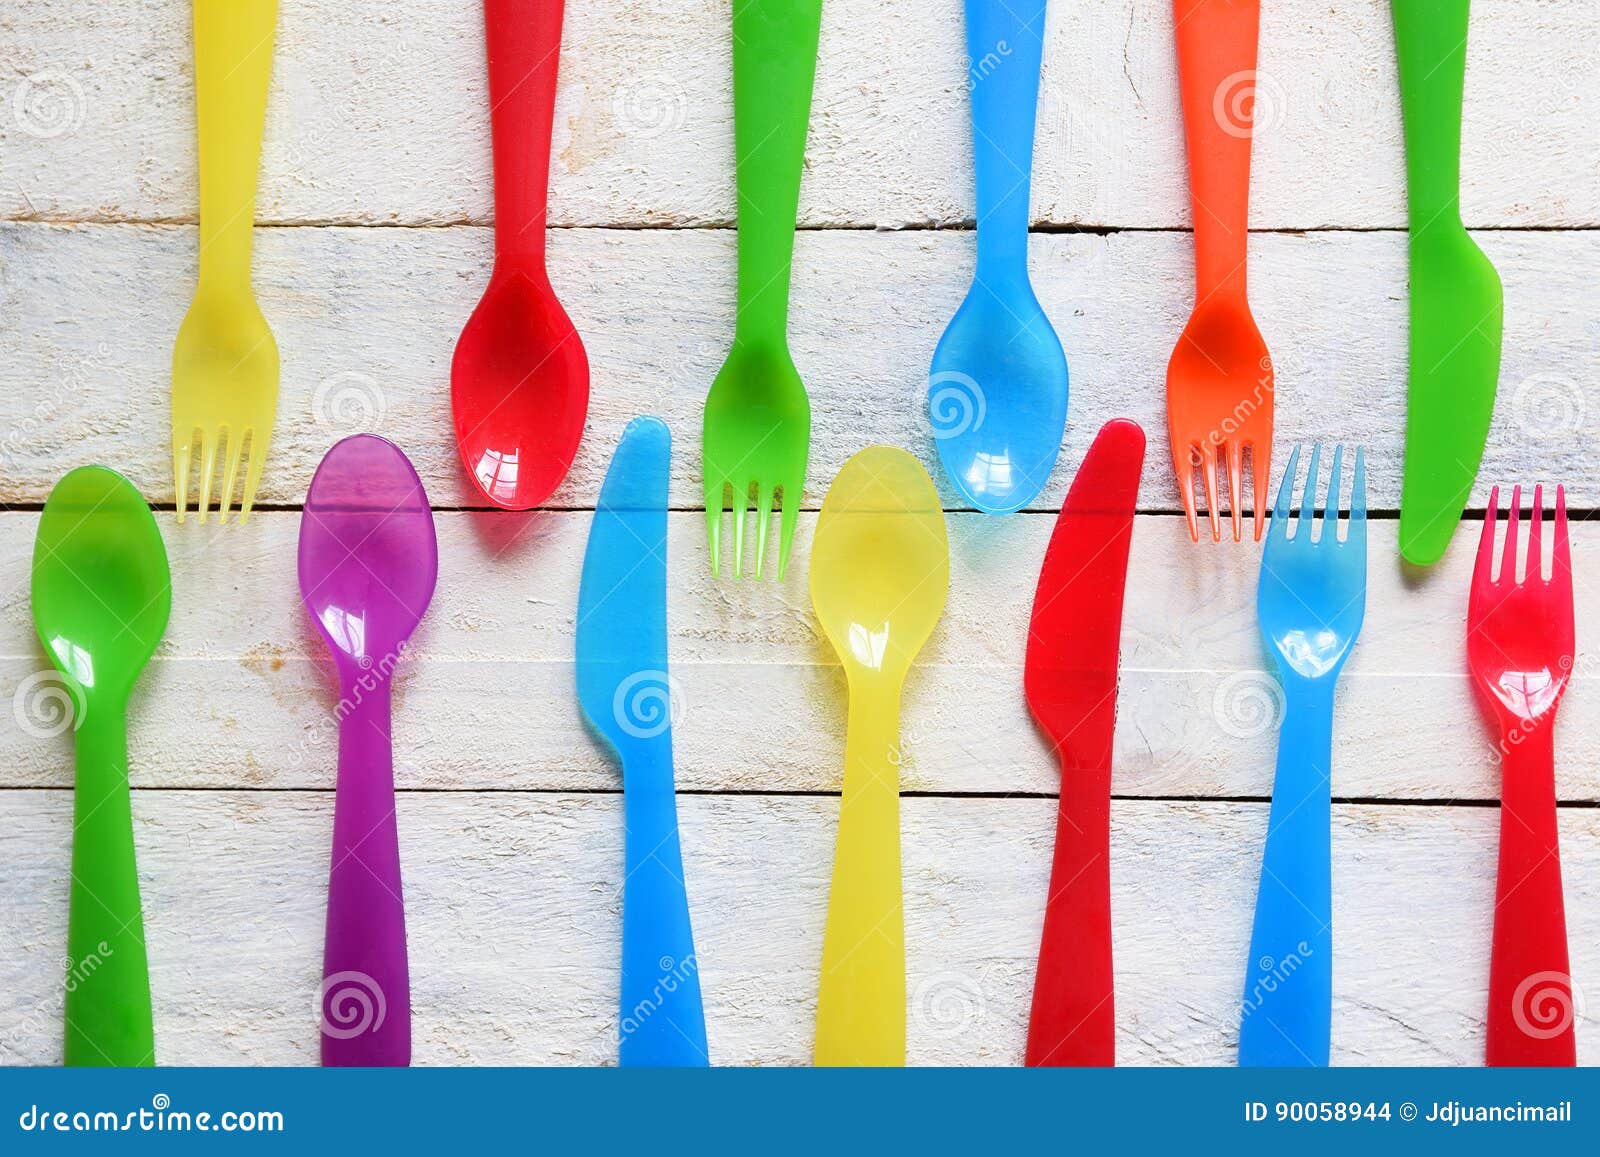 child cutlery on a white wooden table in a kindergarten. colorful flatware